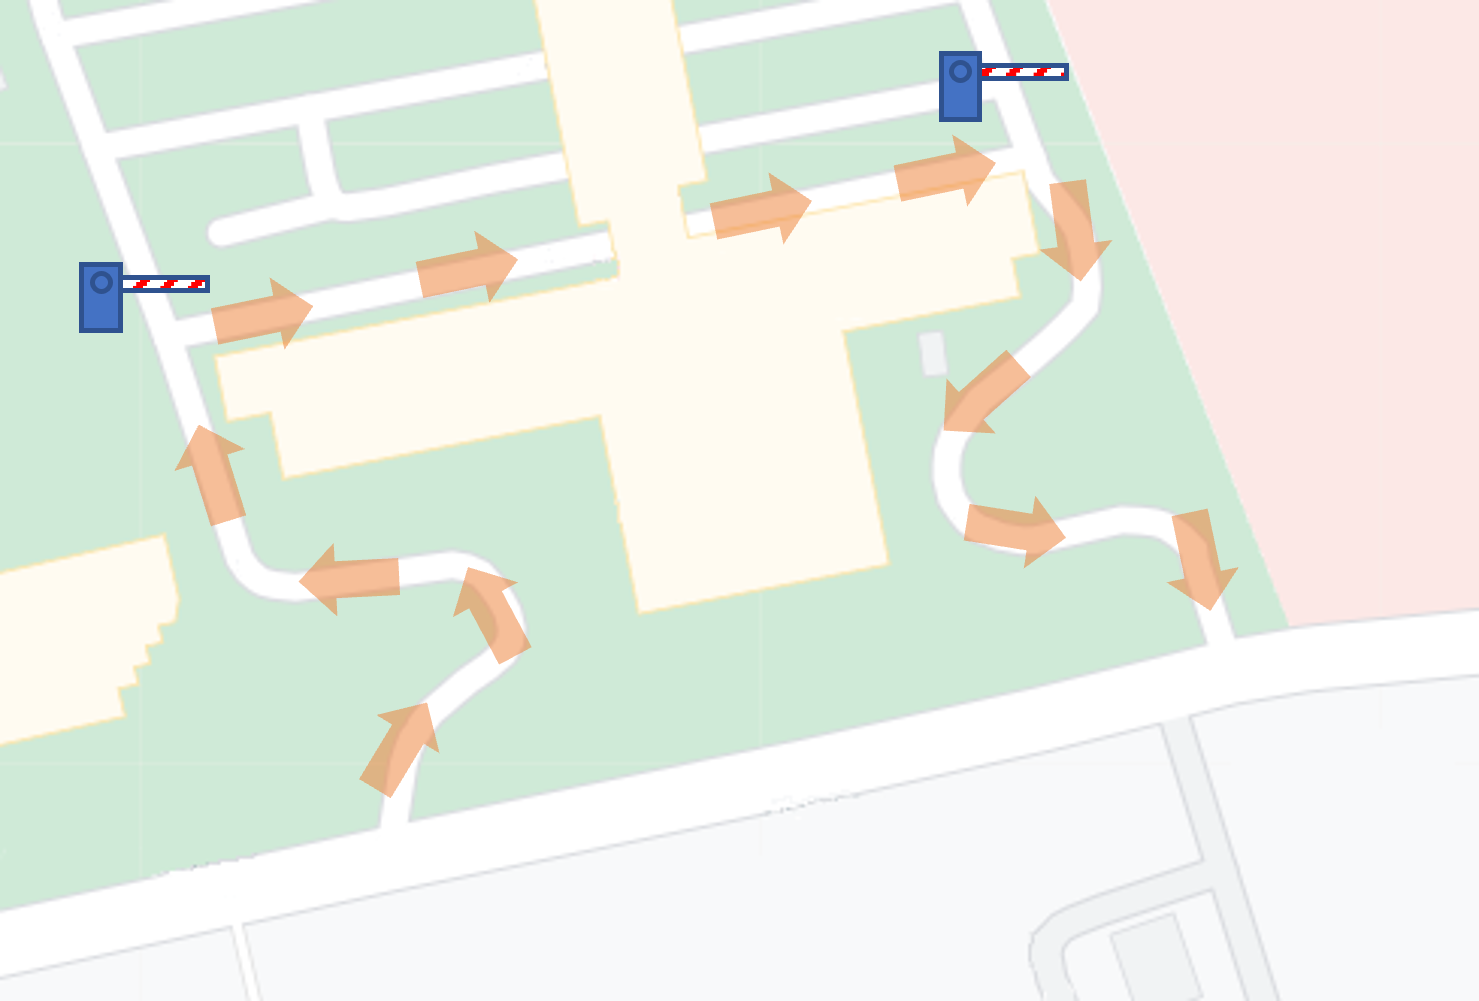 screenshot of google maps showing one way system arrows into and out of zoo